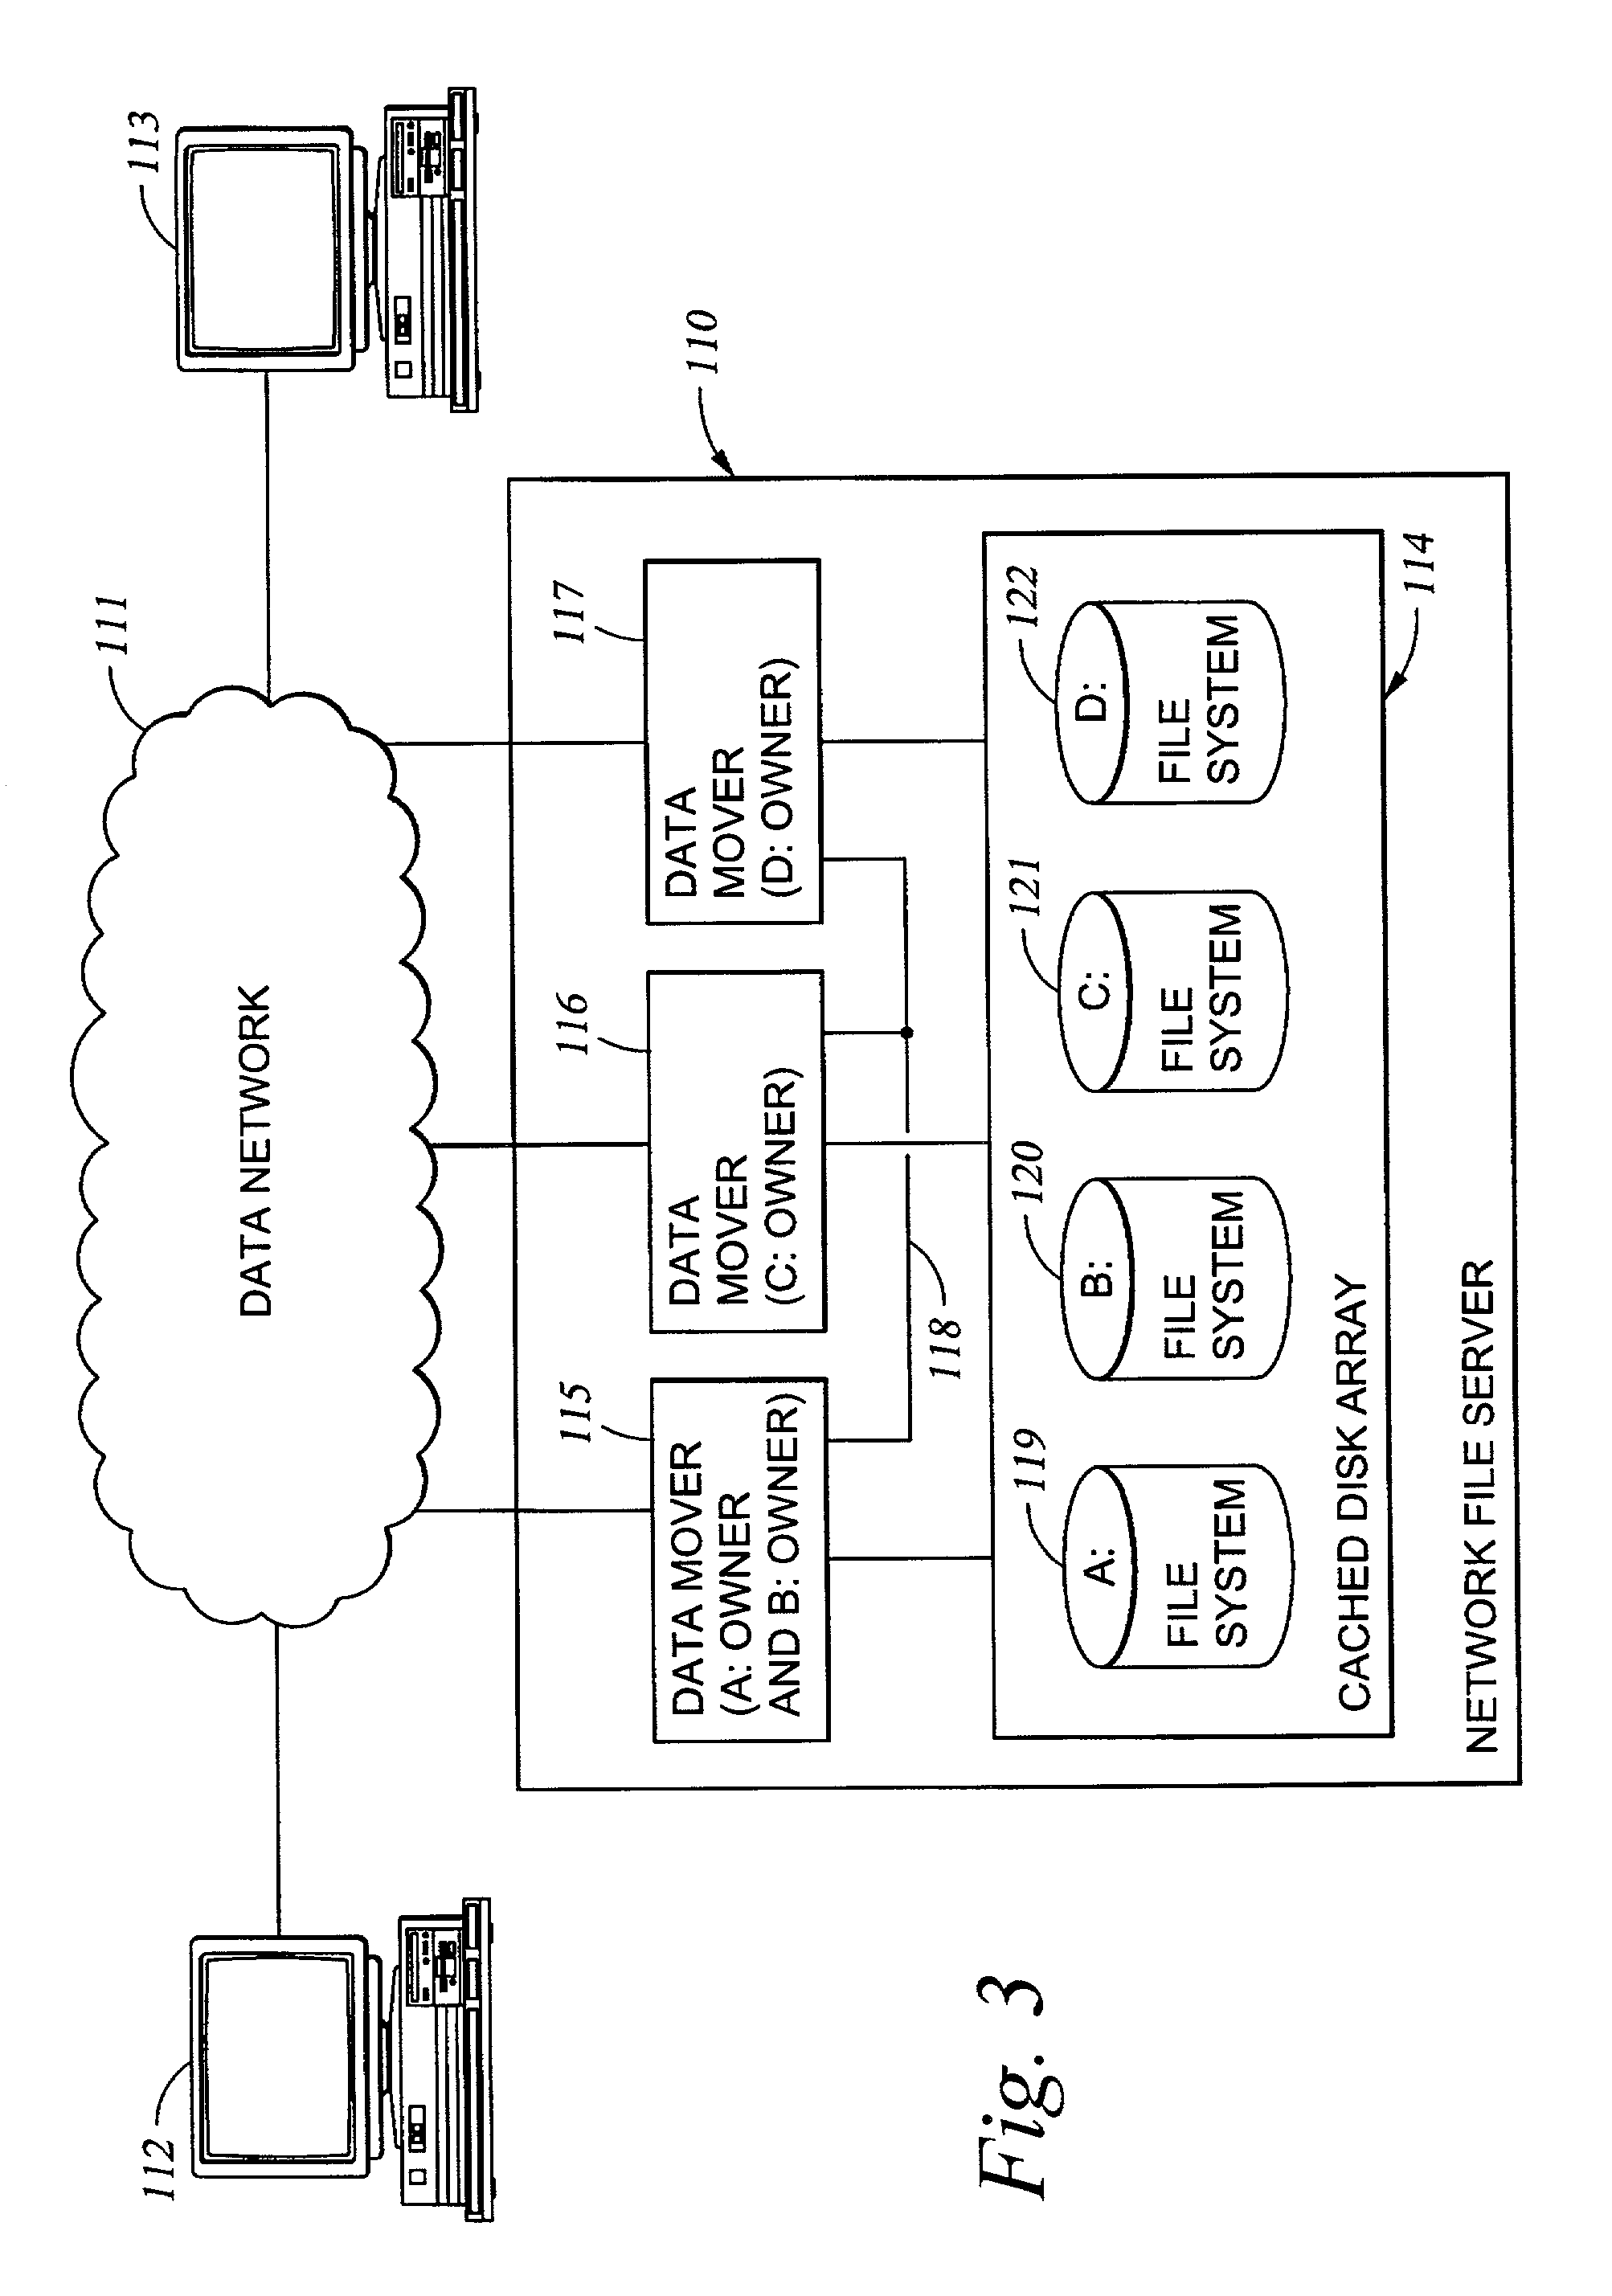 Delegation of metadata management in a storage system by leasing of free file system blocks and i-nodes from a file system owner